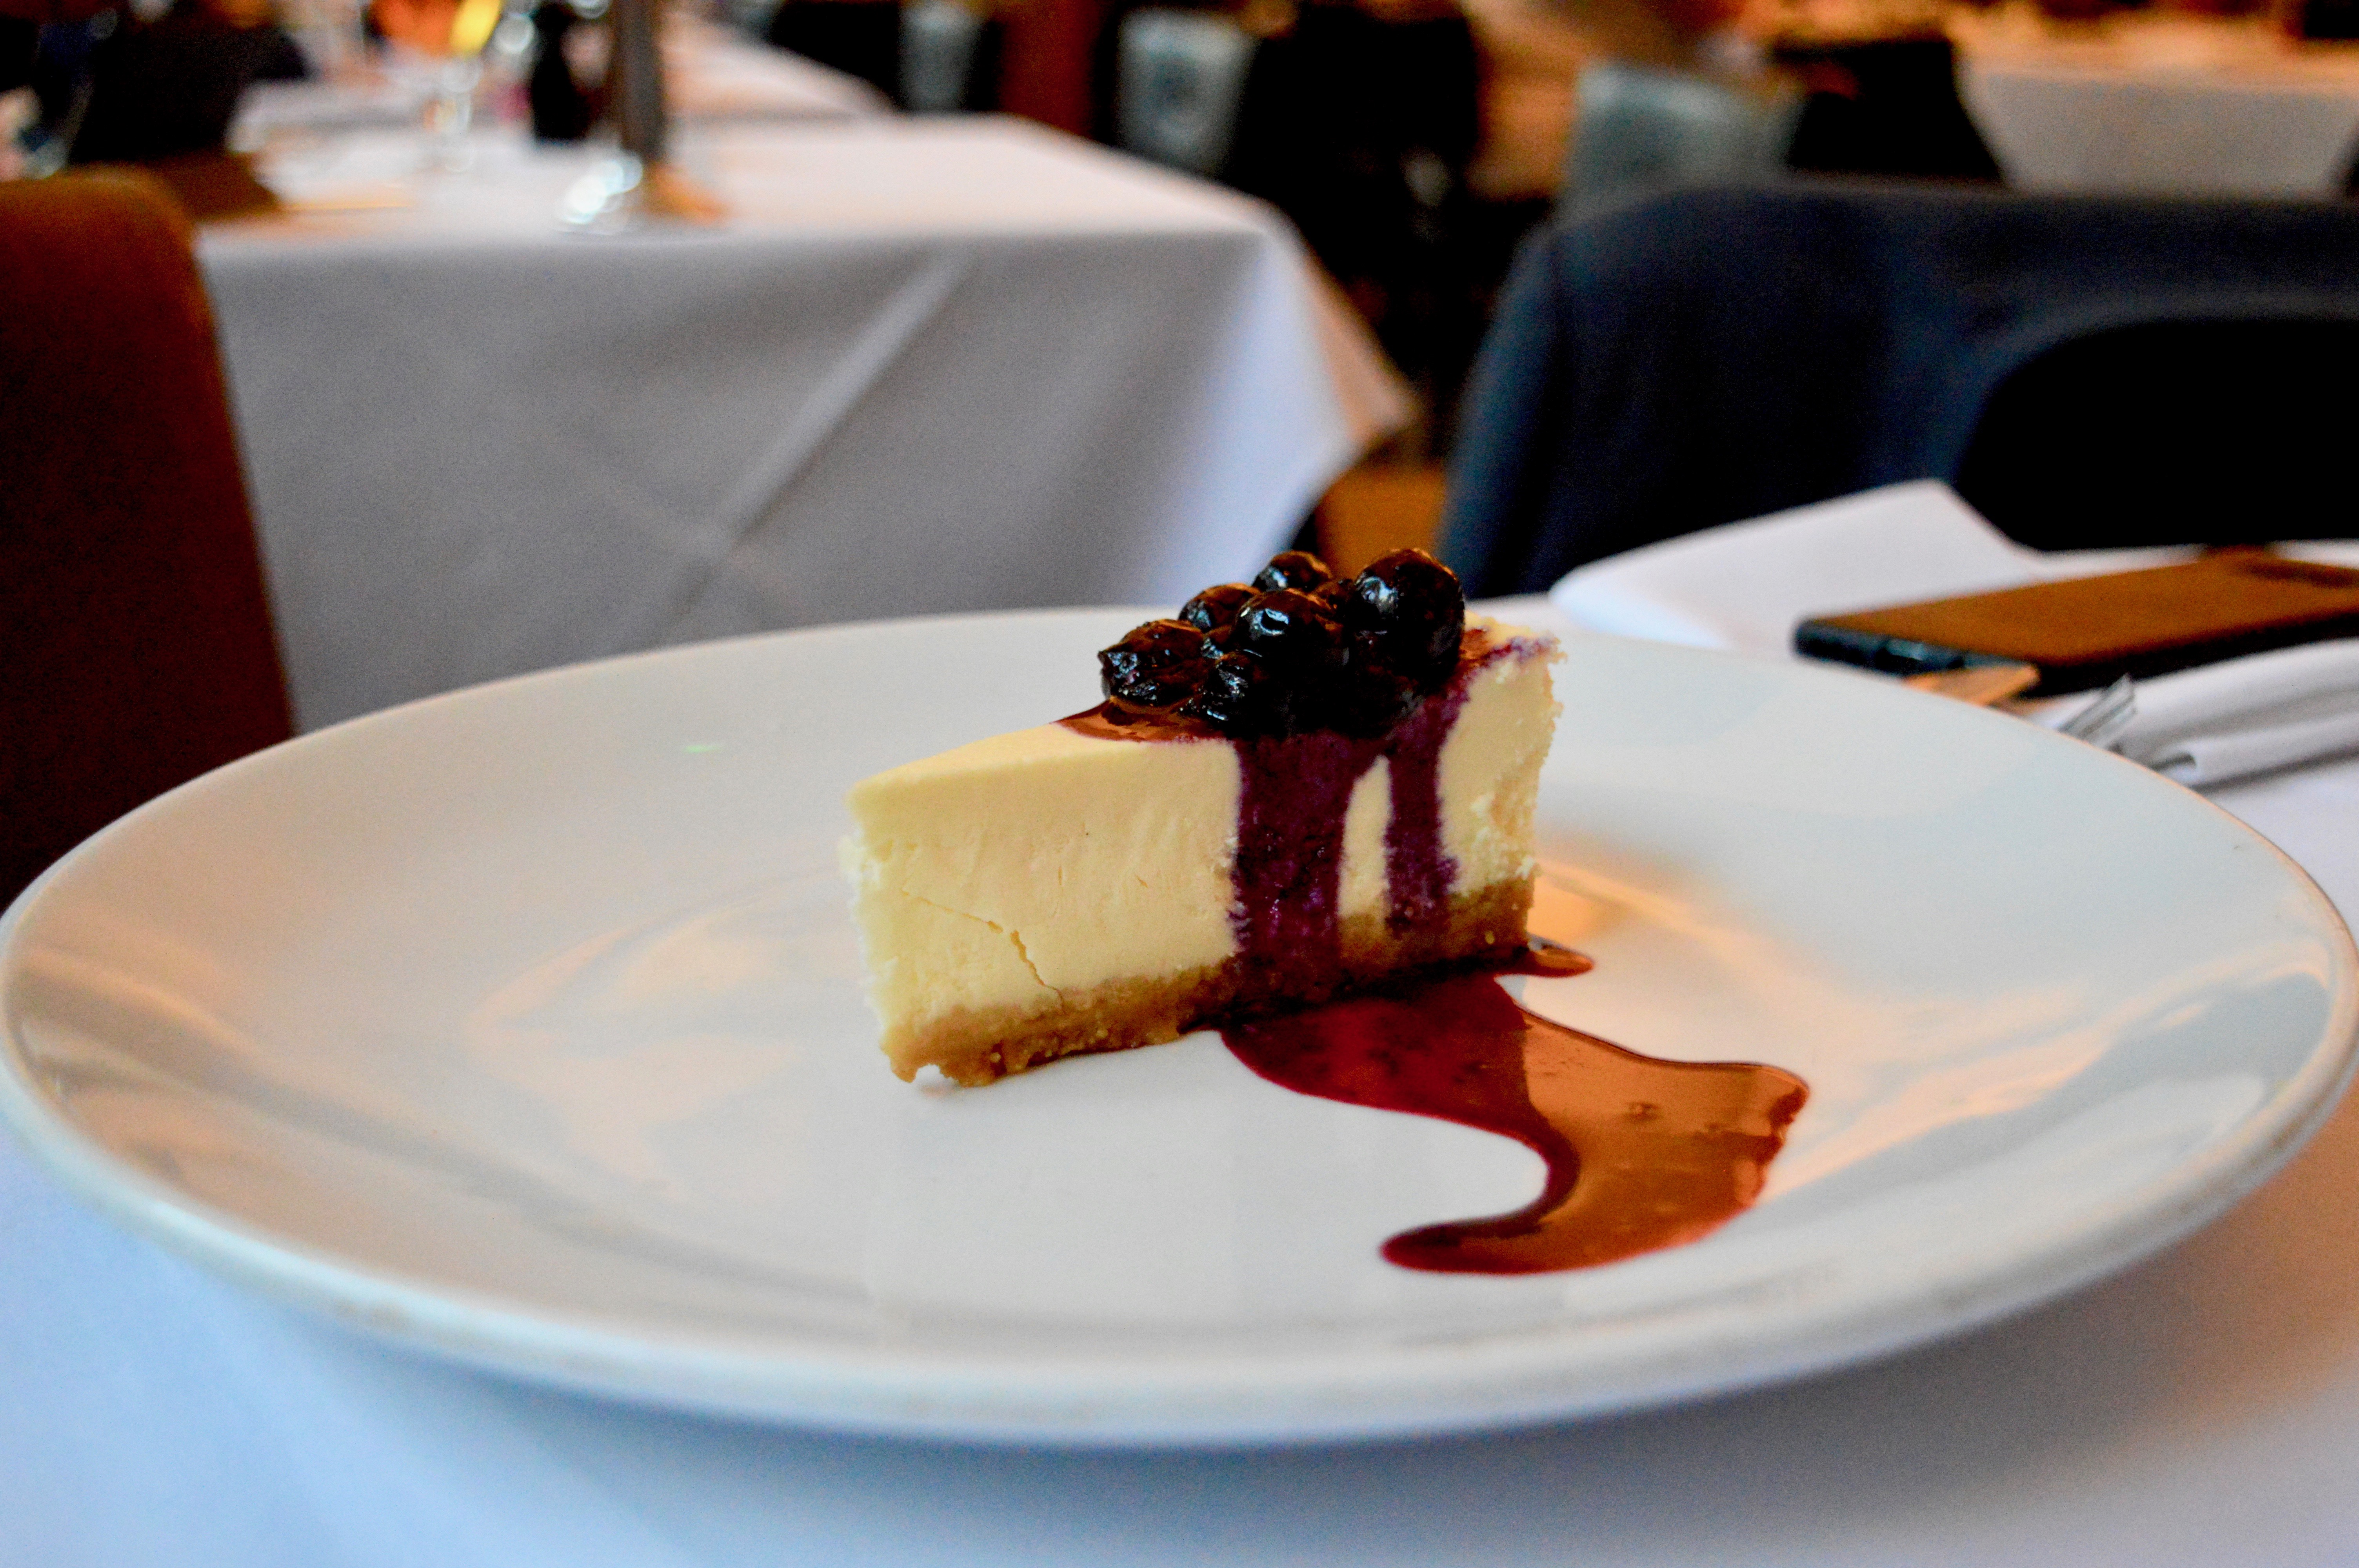 Cheesecake | Where to eat in Newcastle: Marco Pierre White Steakhouse in Hotel Indigo | Food & Lifestyle Reviews | Summer 2018 Menu Launch | Elle Blonde Luxury Lifestyle Destination